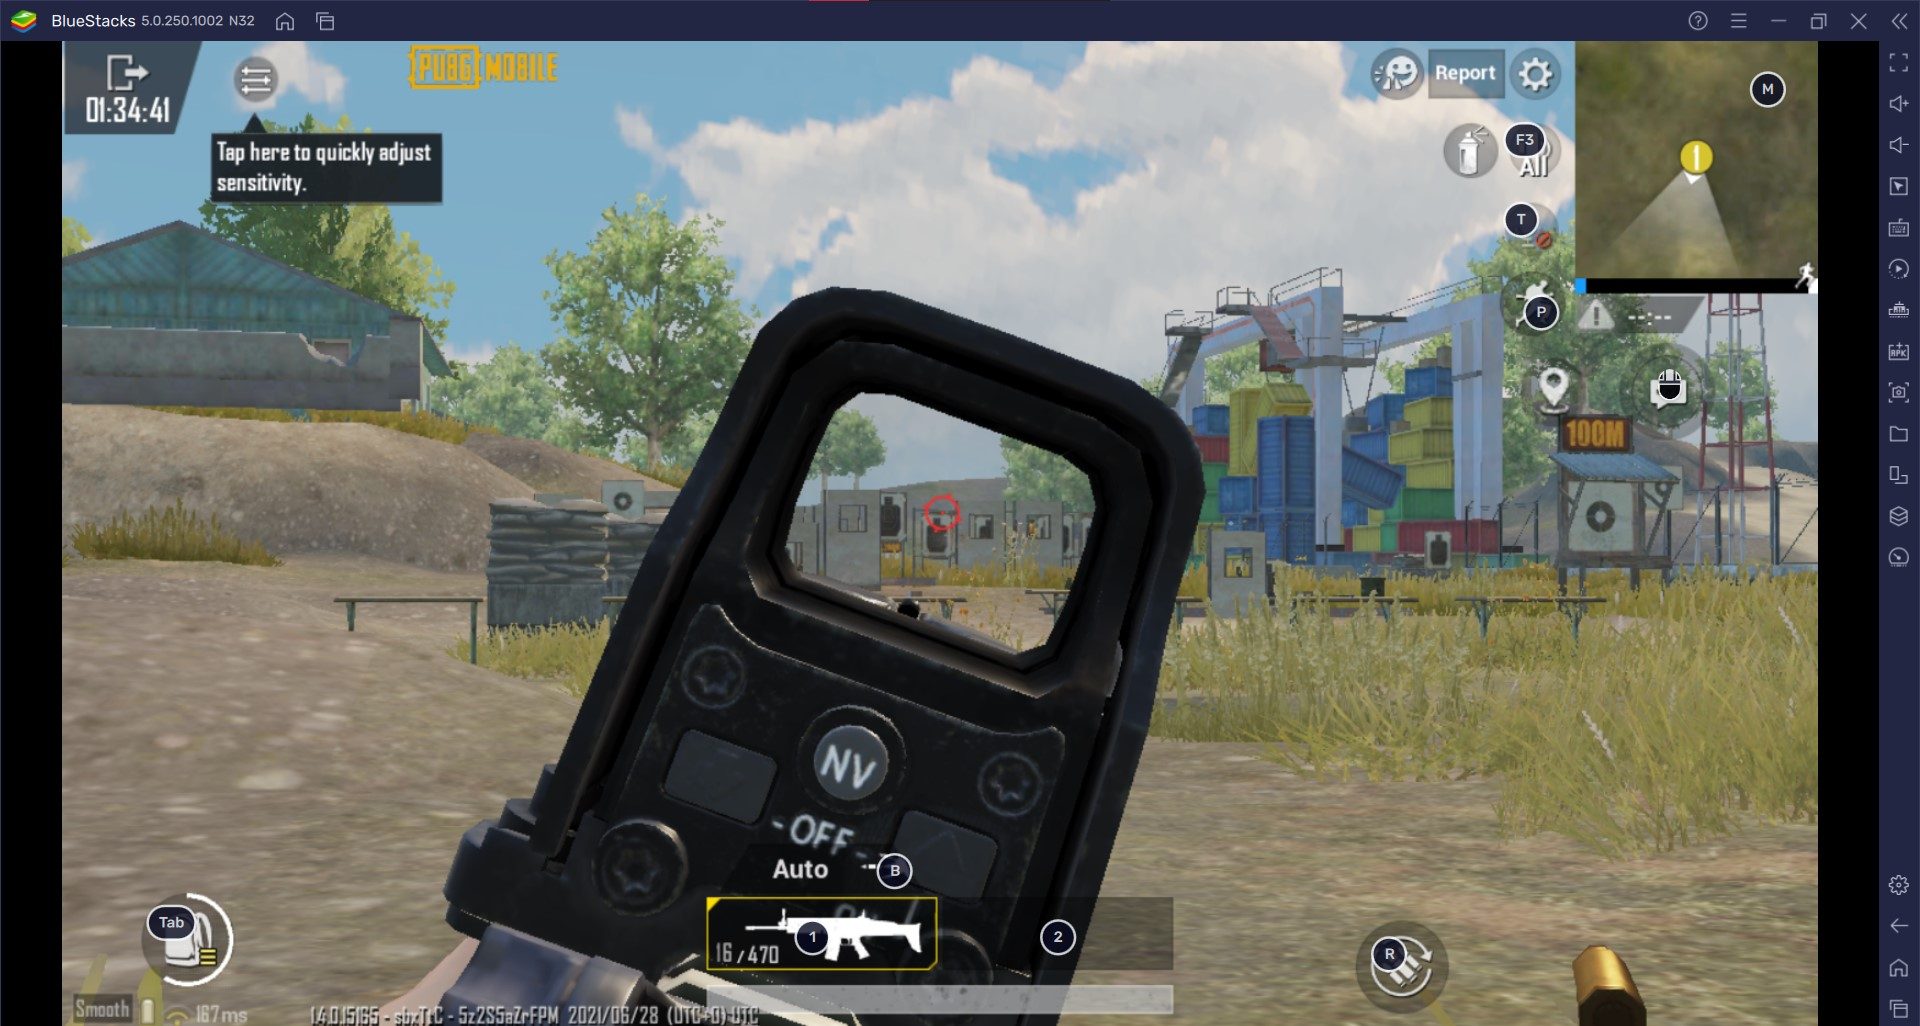 Master the Melee: BlueStacks Guide to Melee Weapons in PUBG Mobile